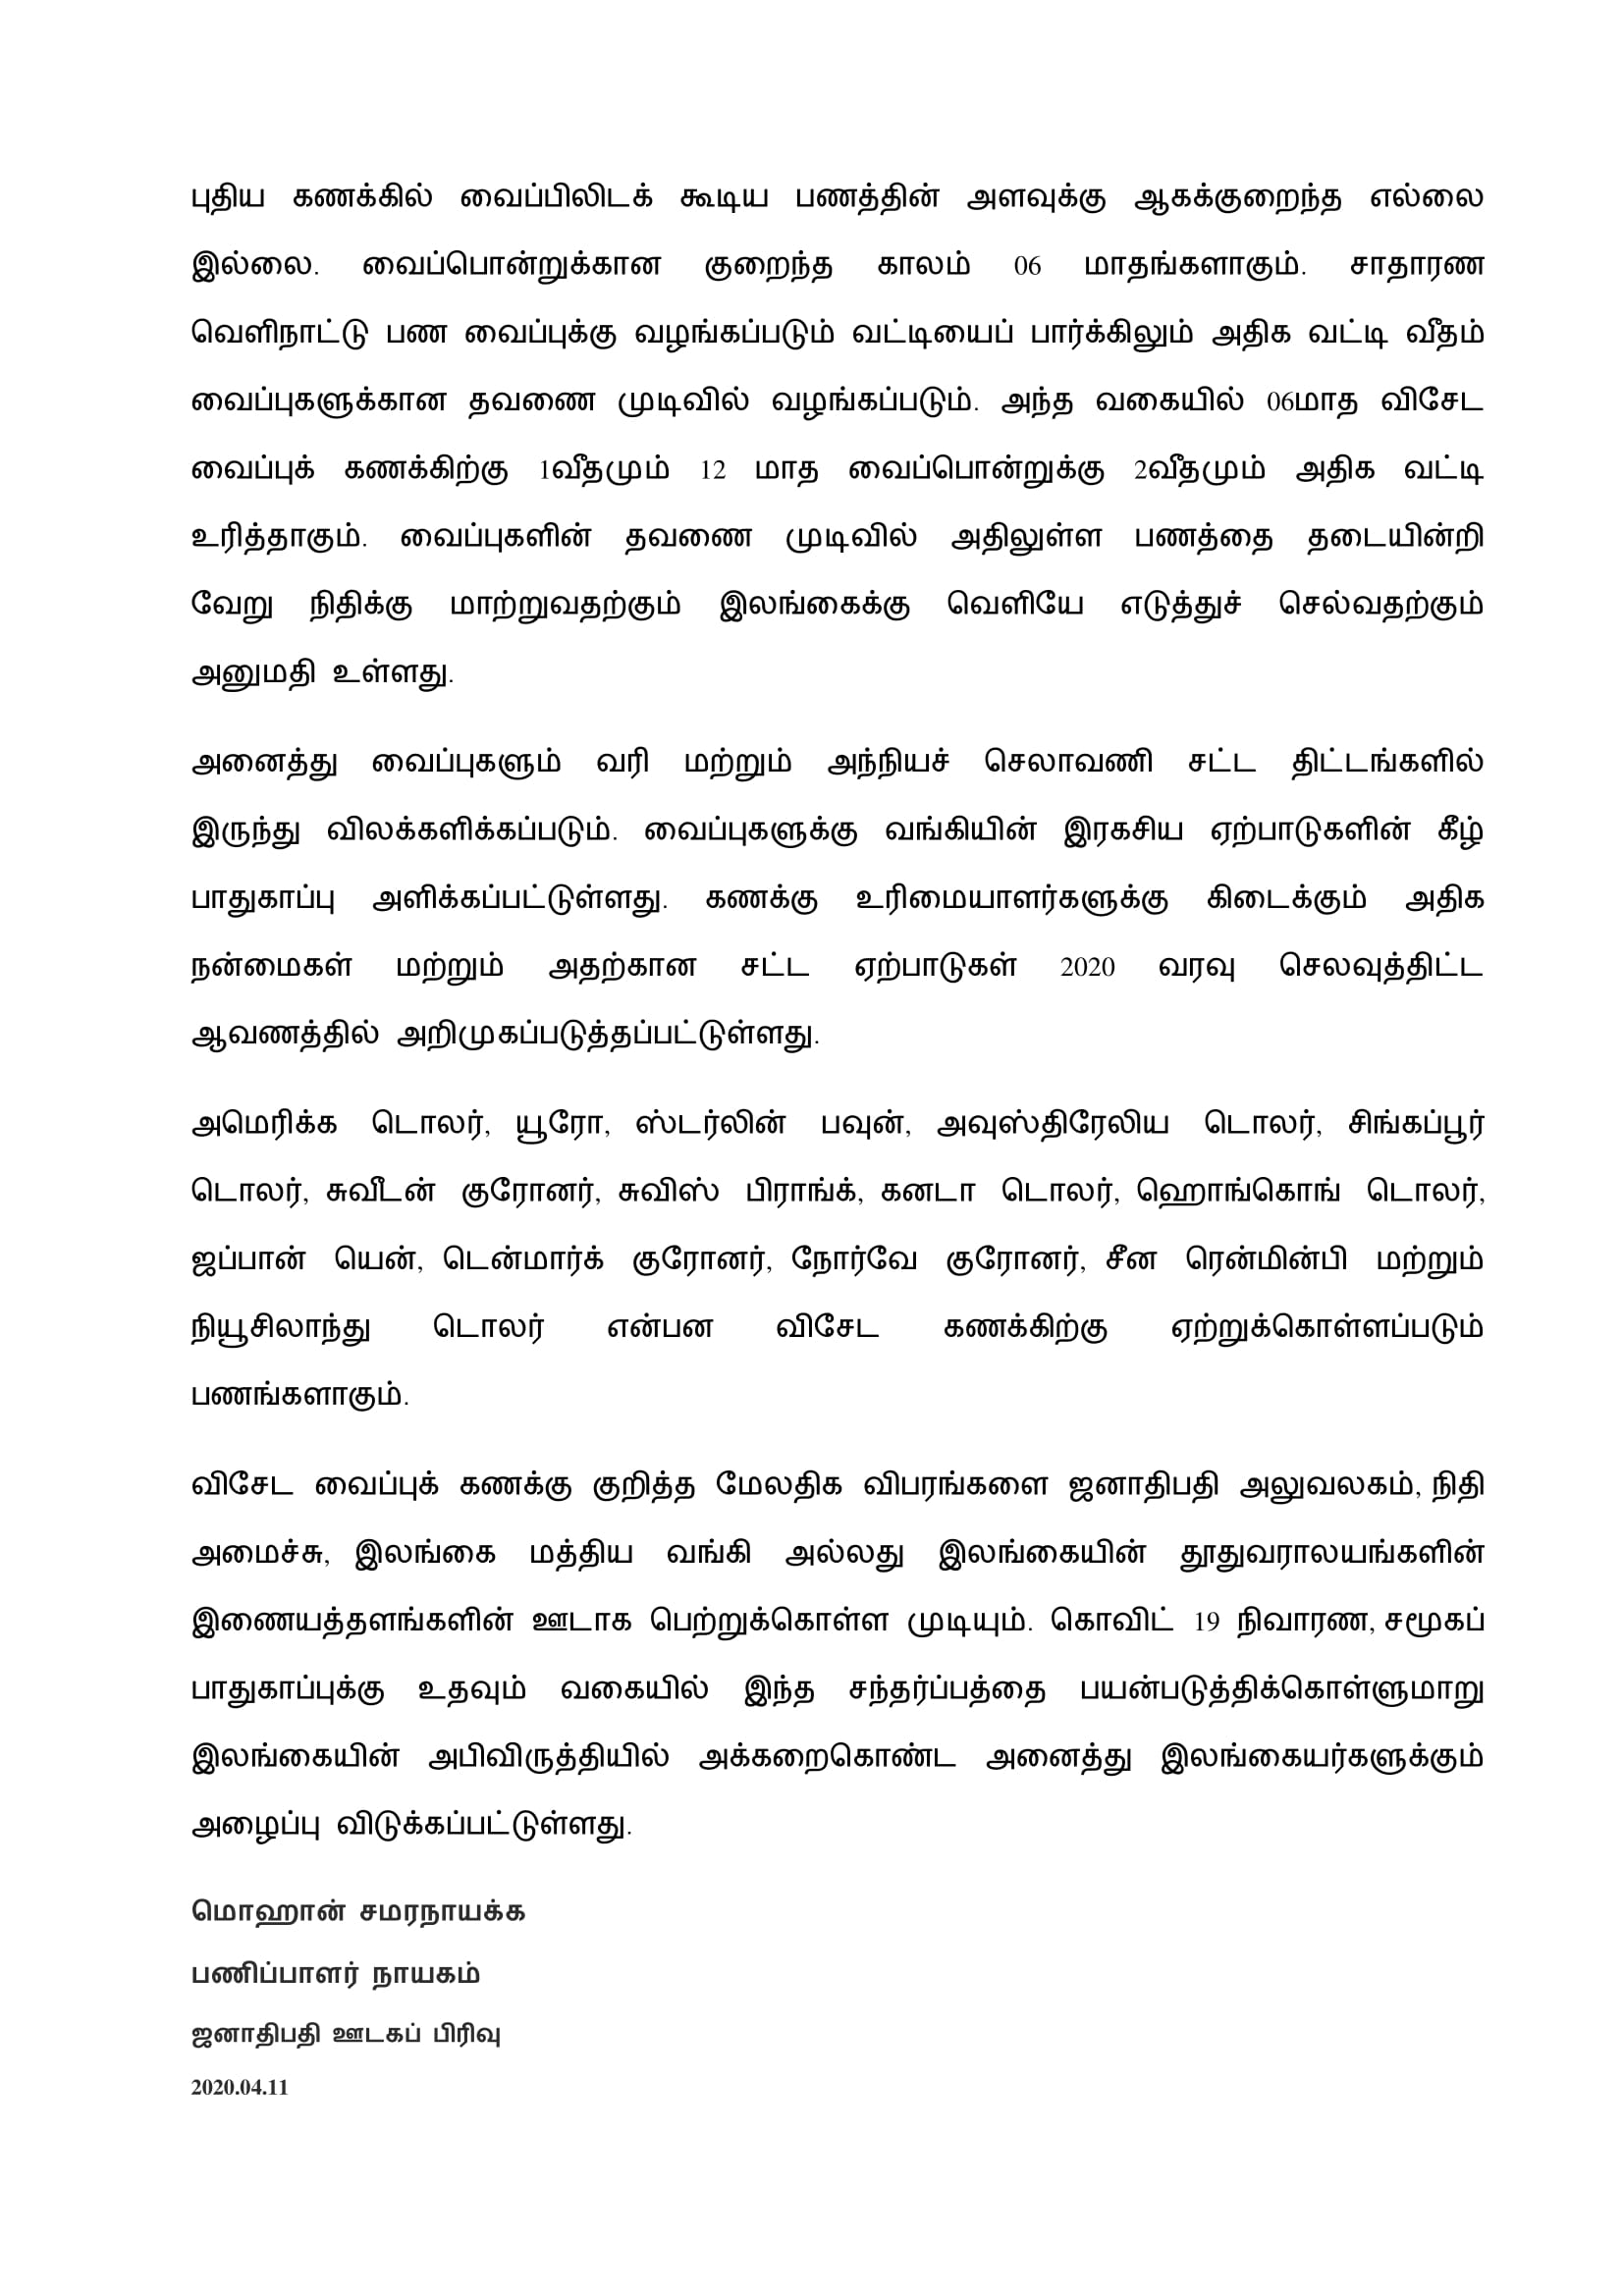 Tamil Release (A new bank account introduced to deposit foreign cash) 11.04.2020-2